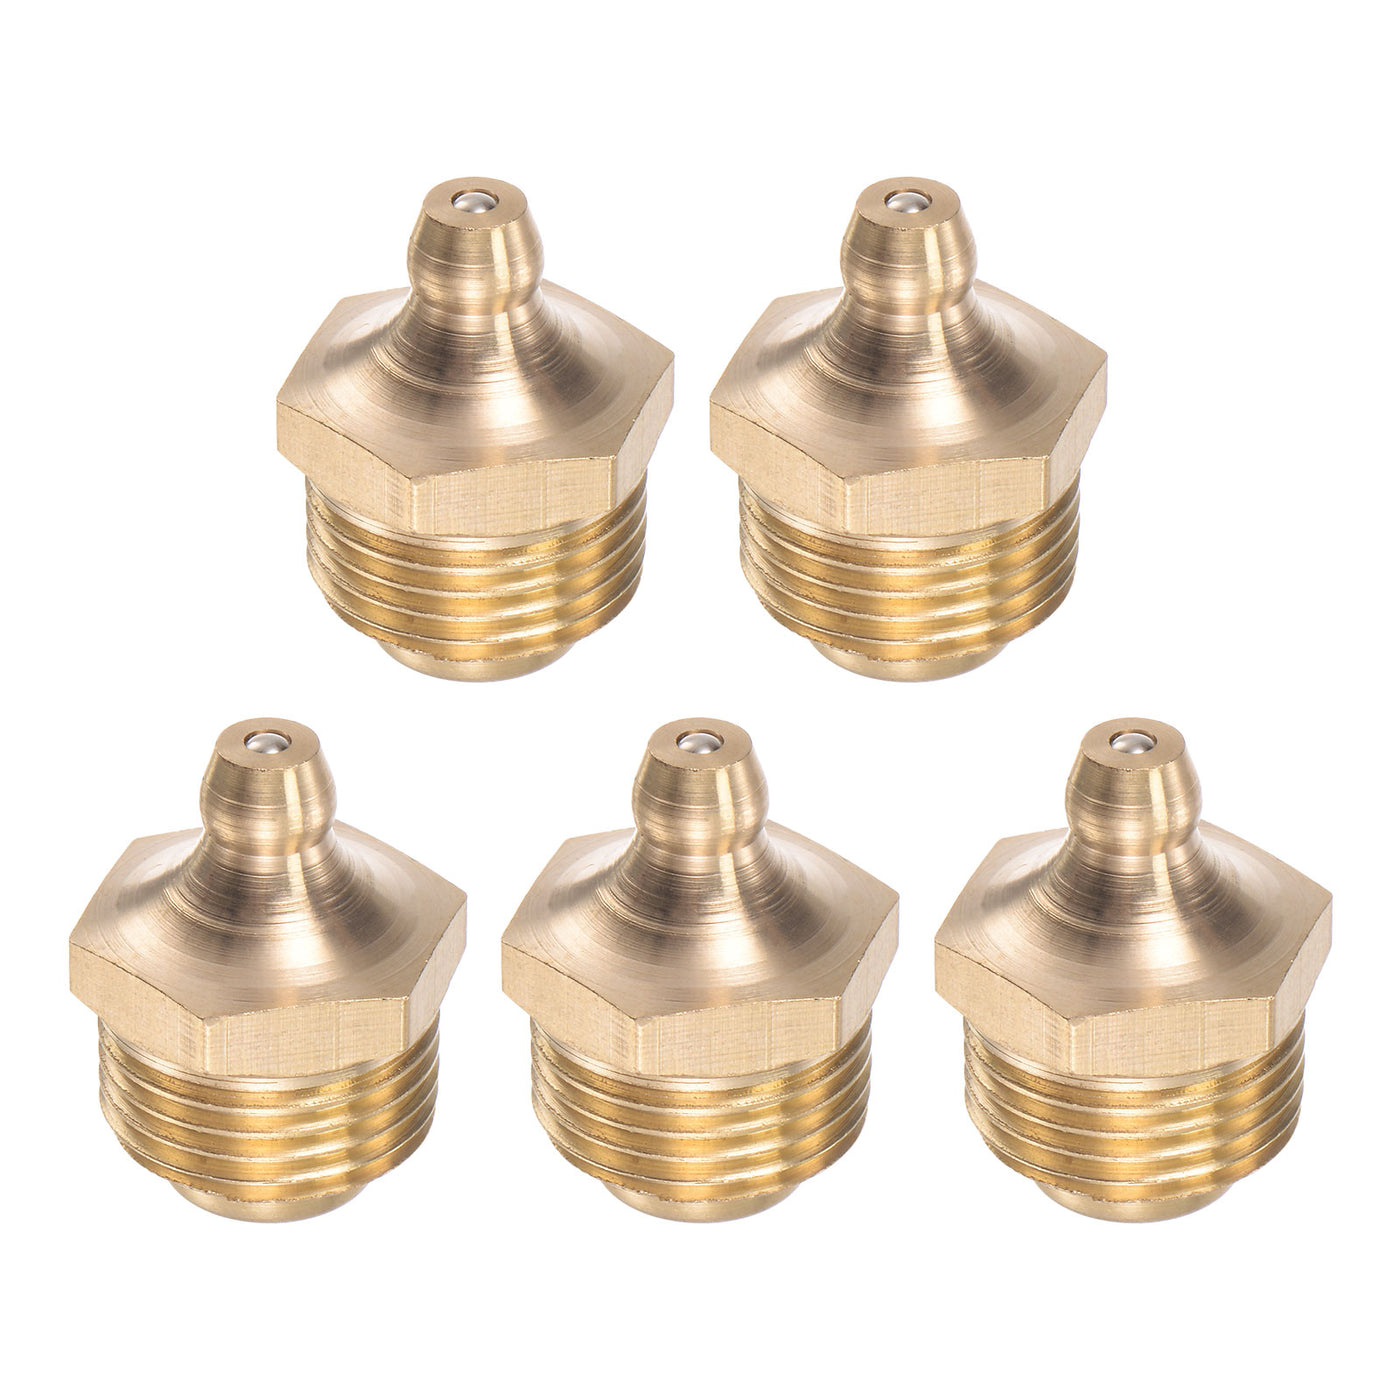 Uxcell Uxcell Brass Straight Hydraulic Grease Fitting G3/8 Thread 17mm Width, 5Pcs